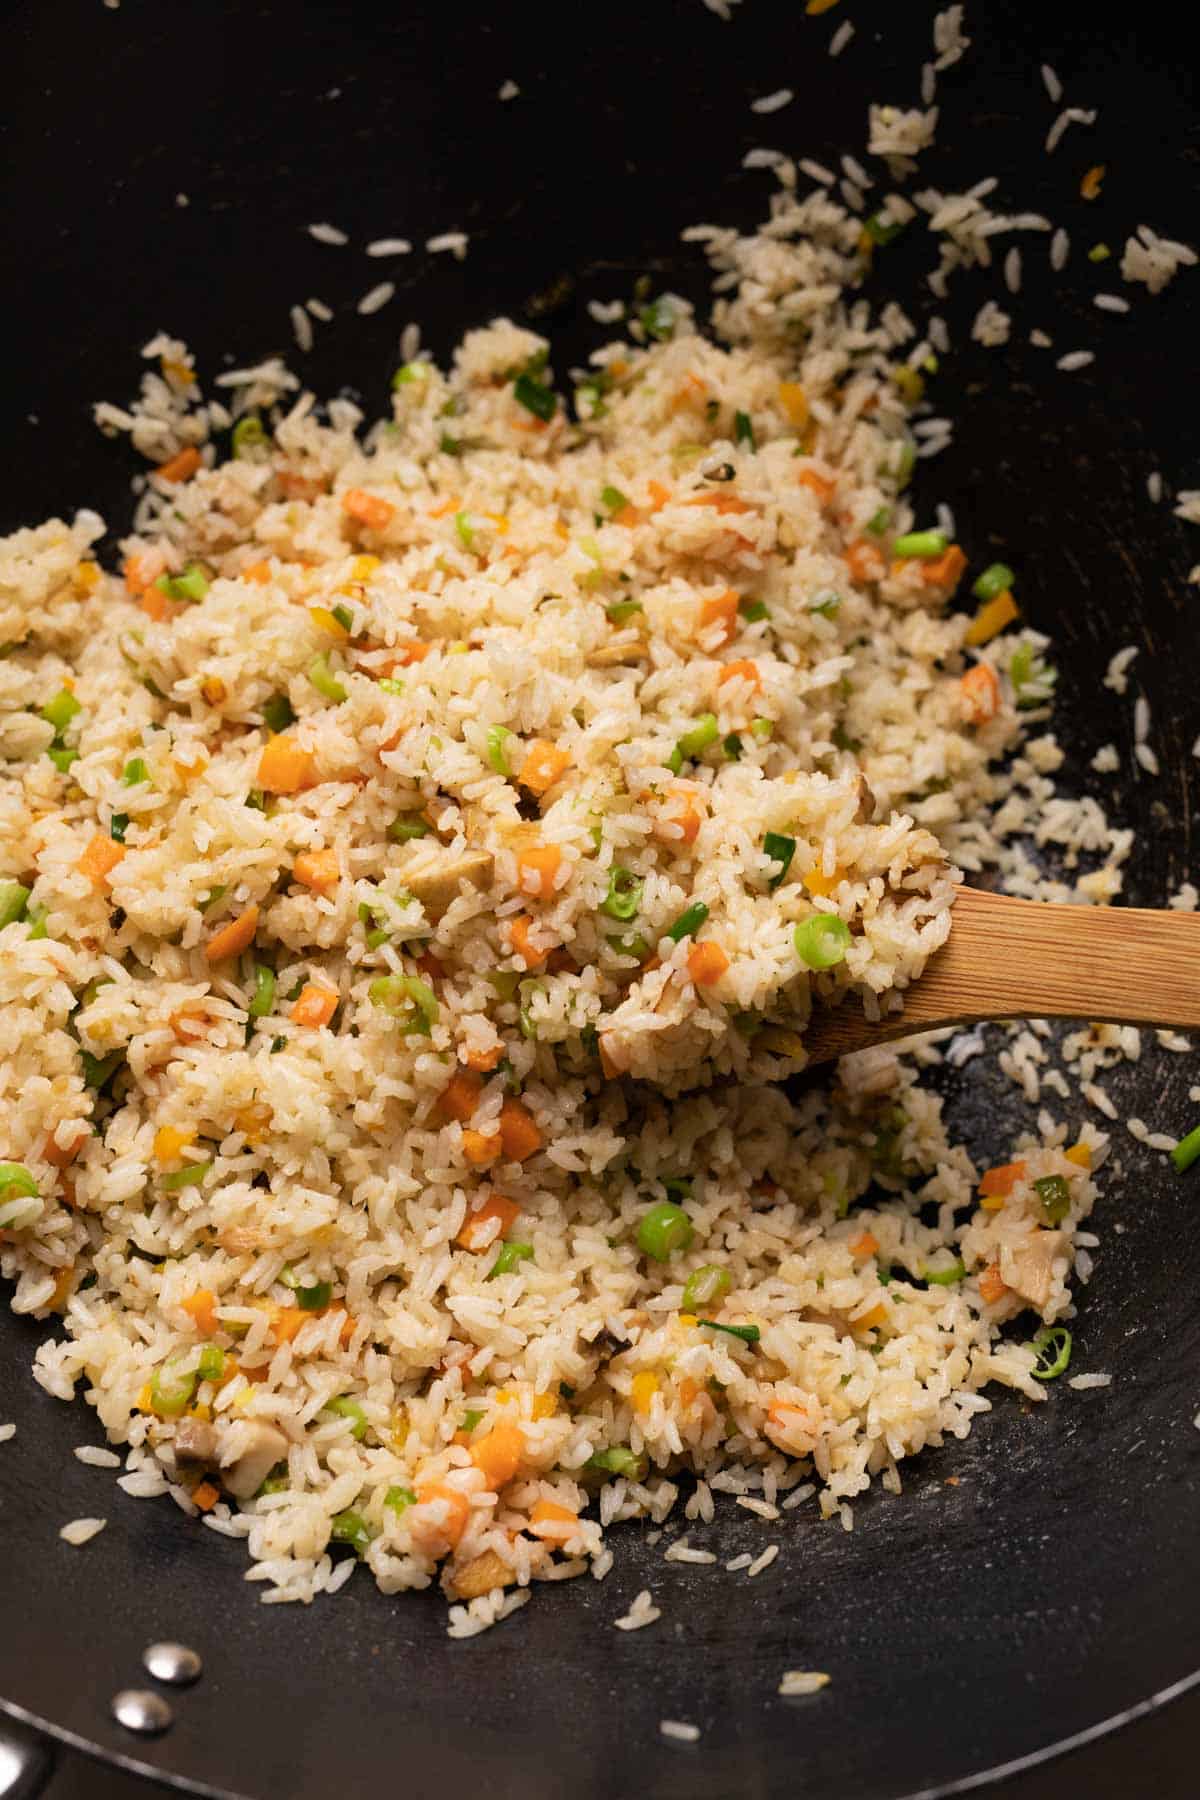 Picture of fried rice in a wok